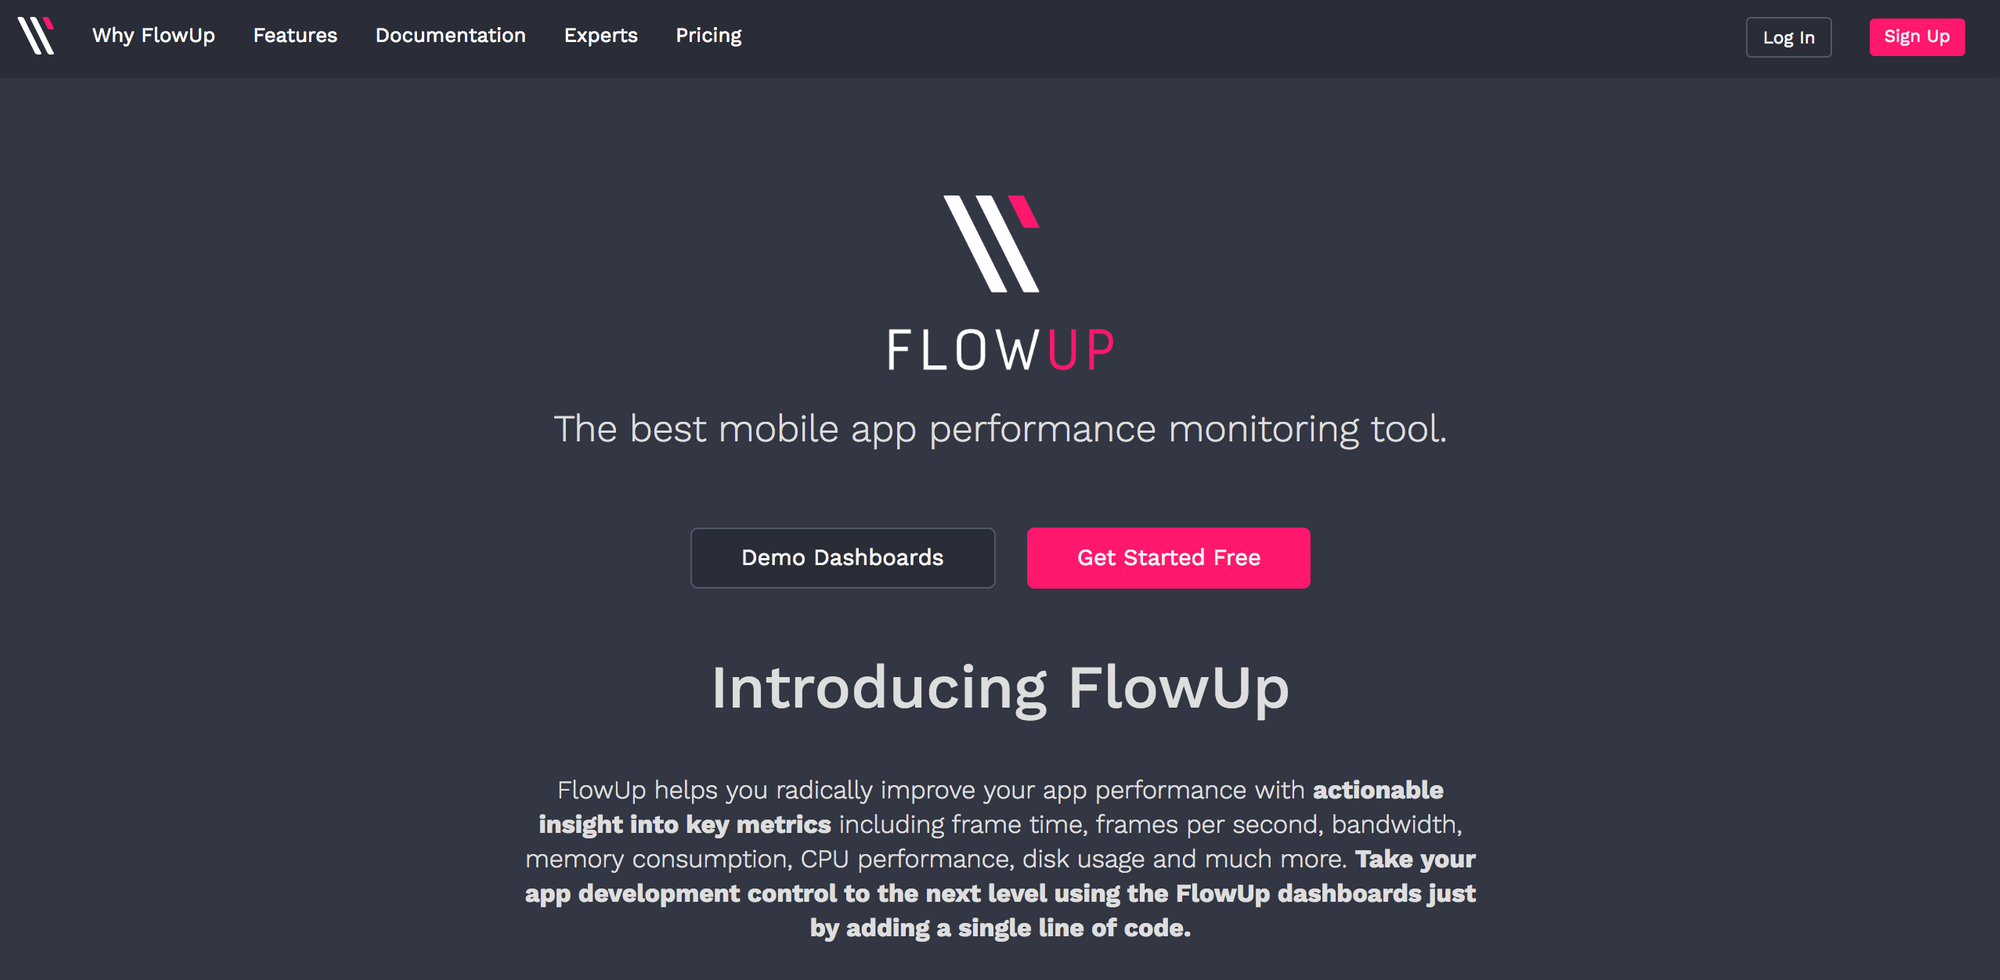 FlowUp:  Announcing a new perspective